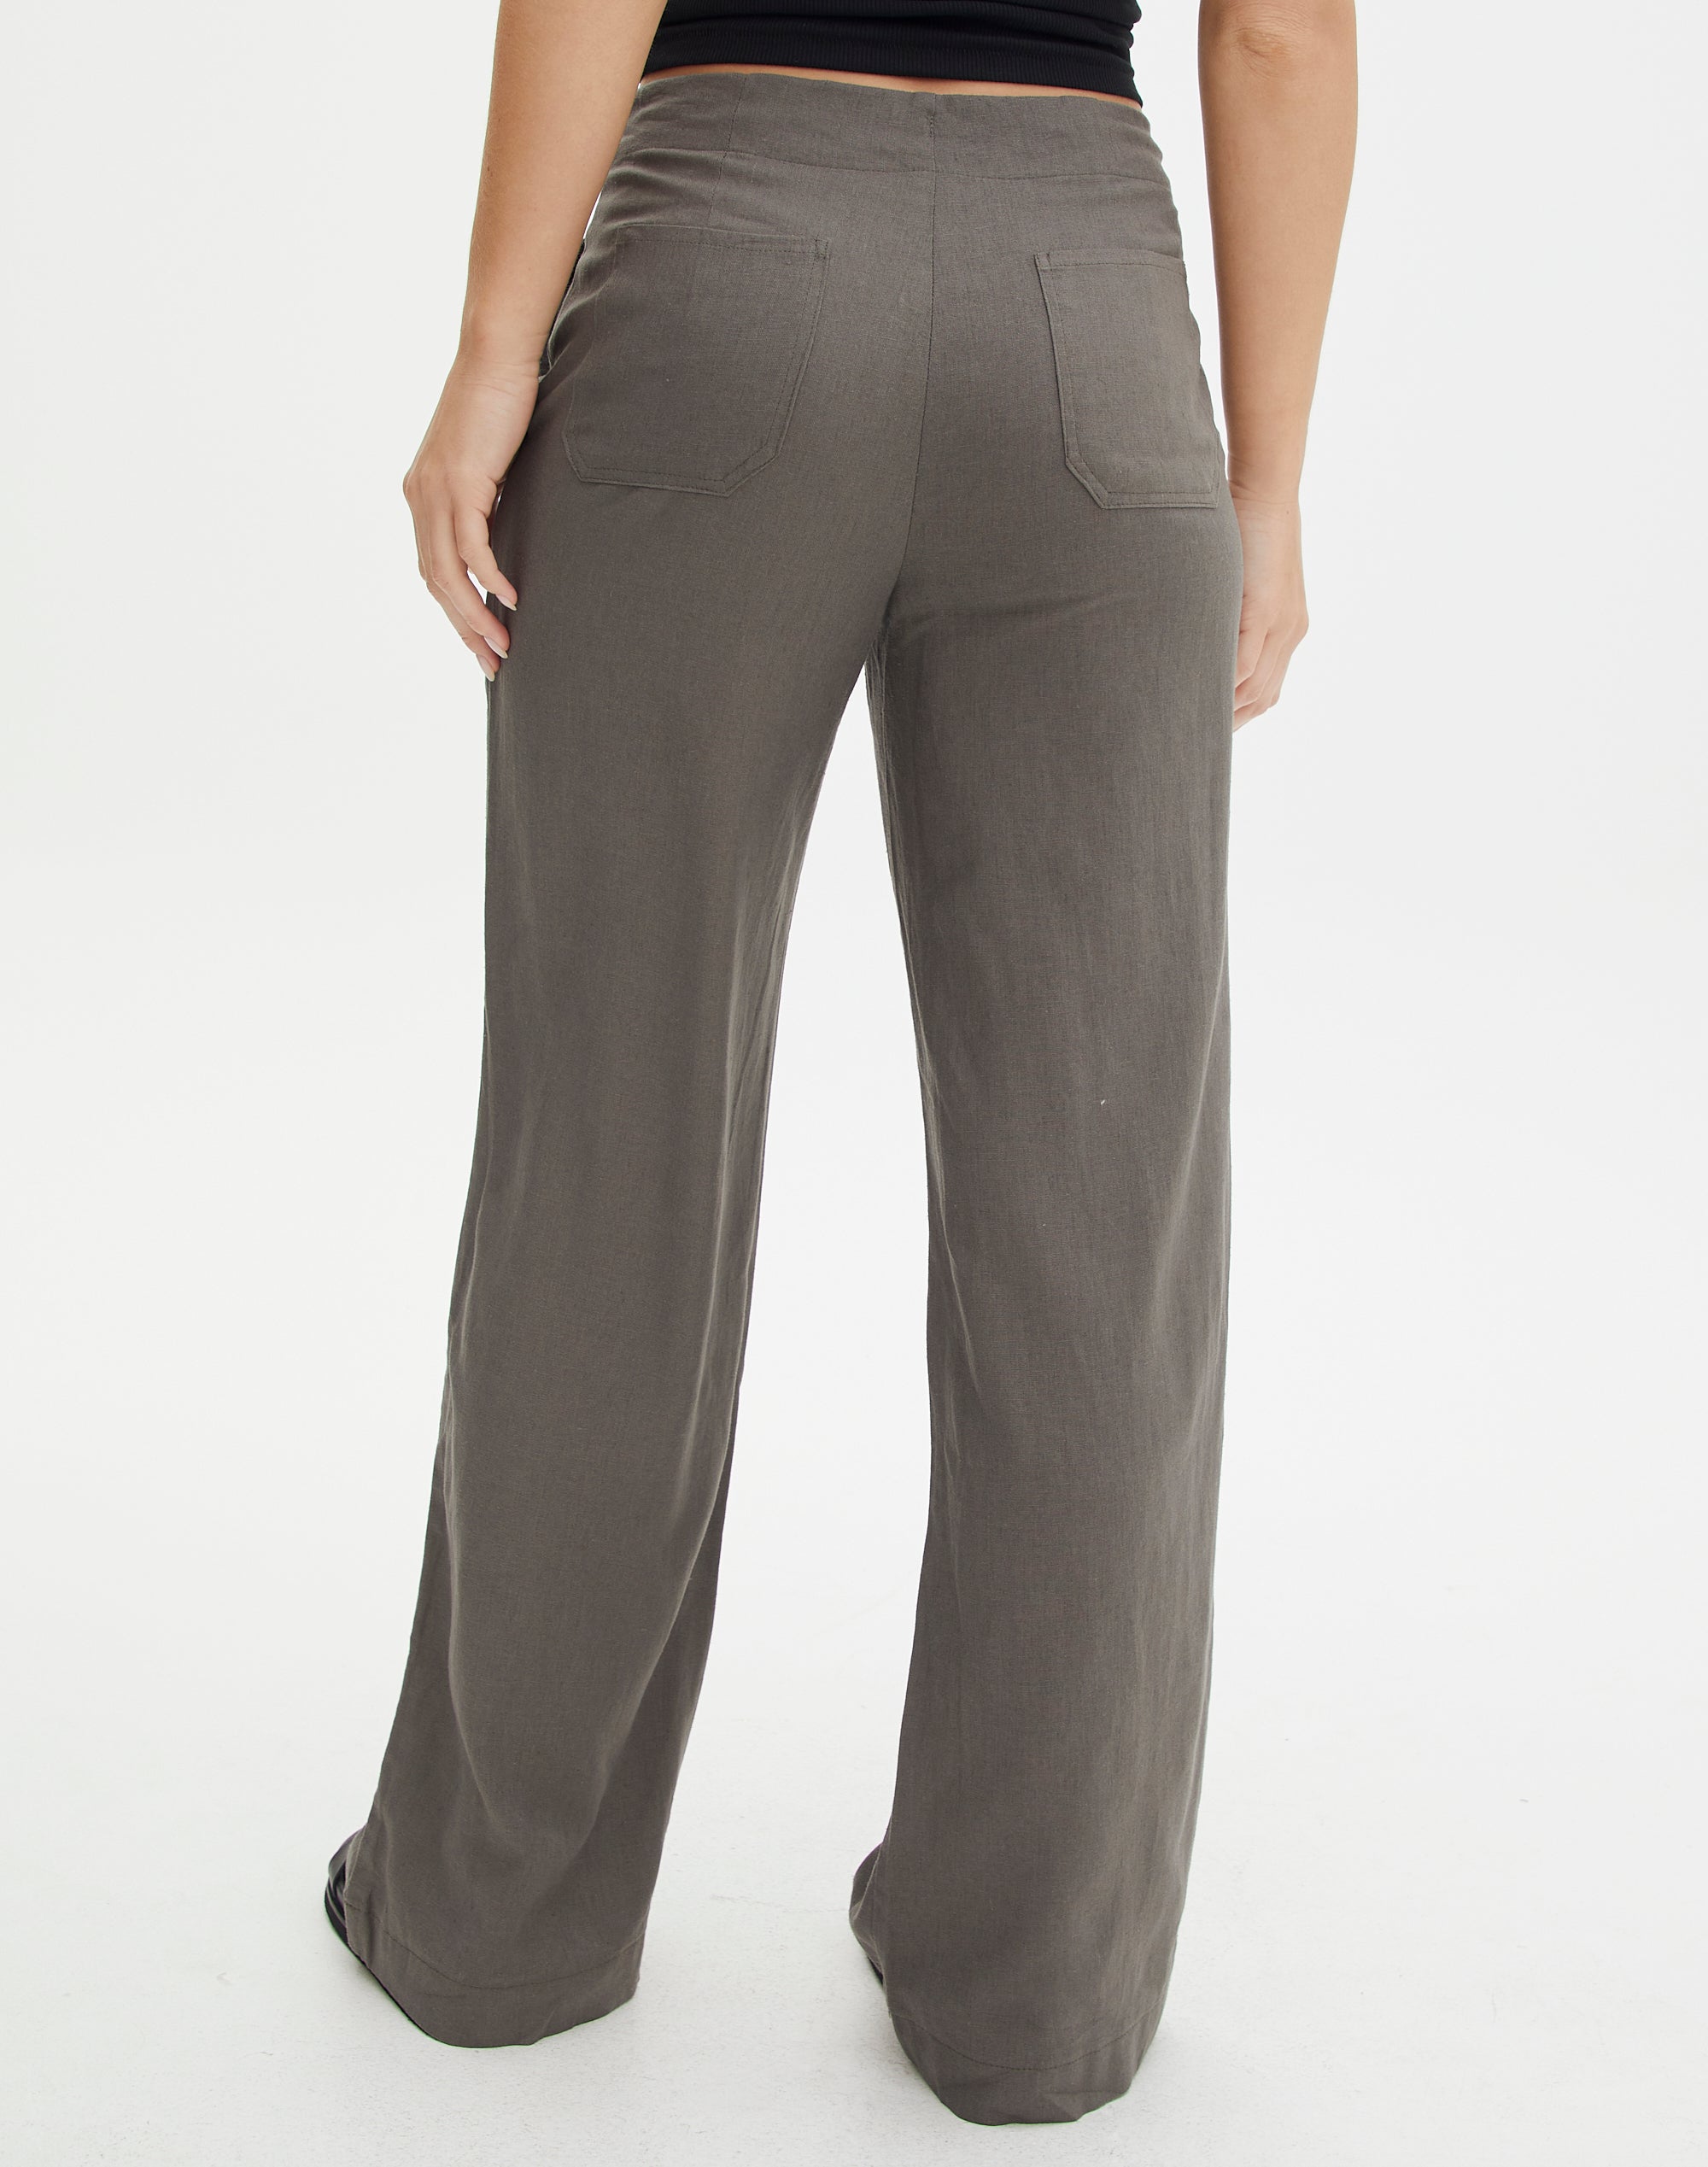 Vinyl Pants Pvc Bell-bottom Pants With Medium Waist Facing and Long Zip on  the Back MADE TO ORDER -  New Zealand